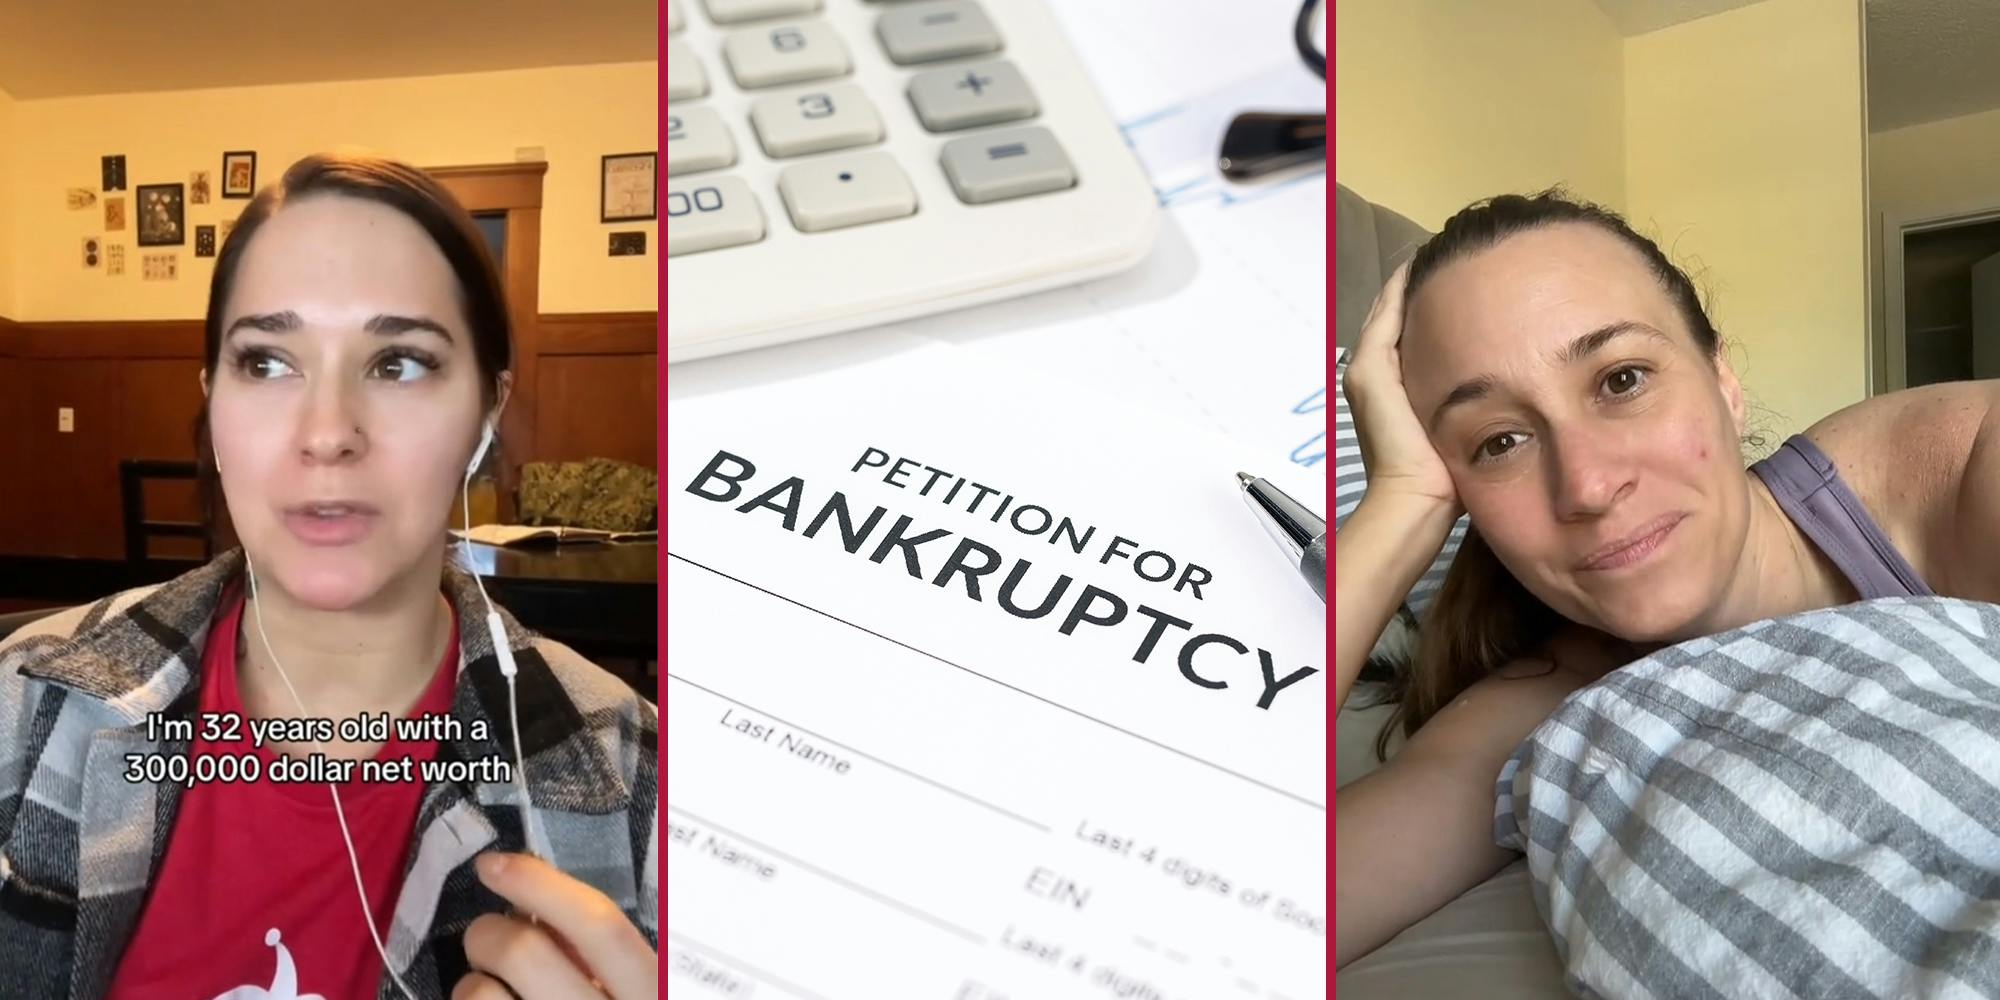 Woman who owned house, had $500K in bank says she’s now contemplating bankruptcy